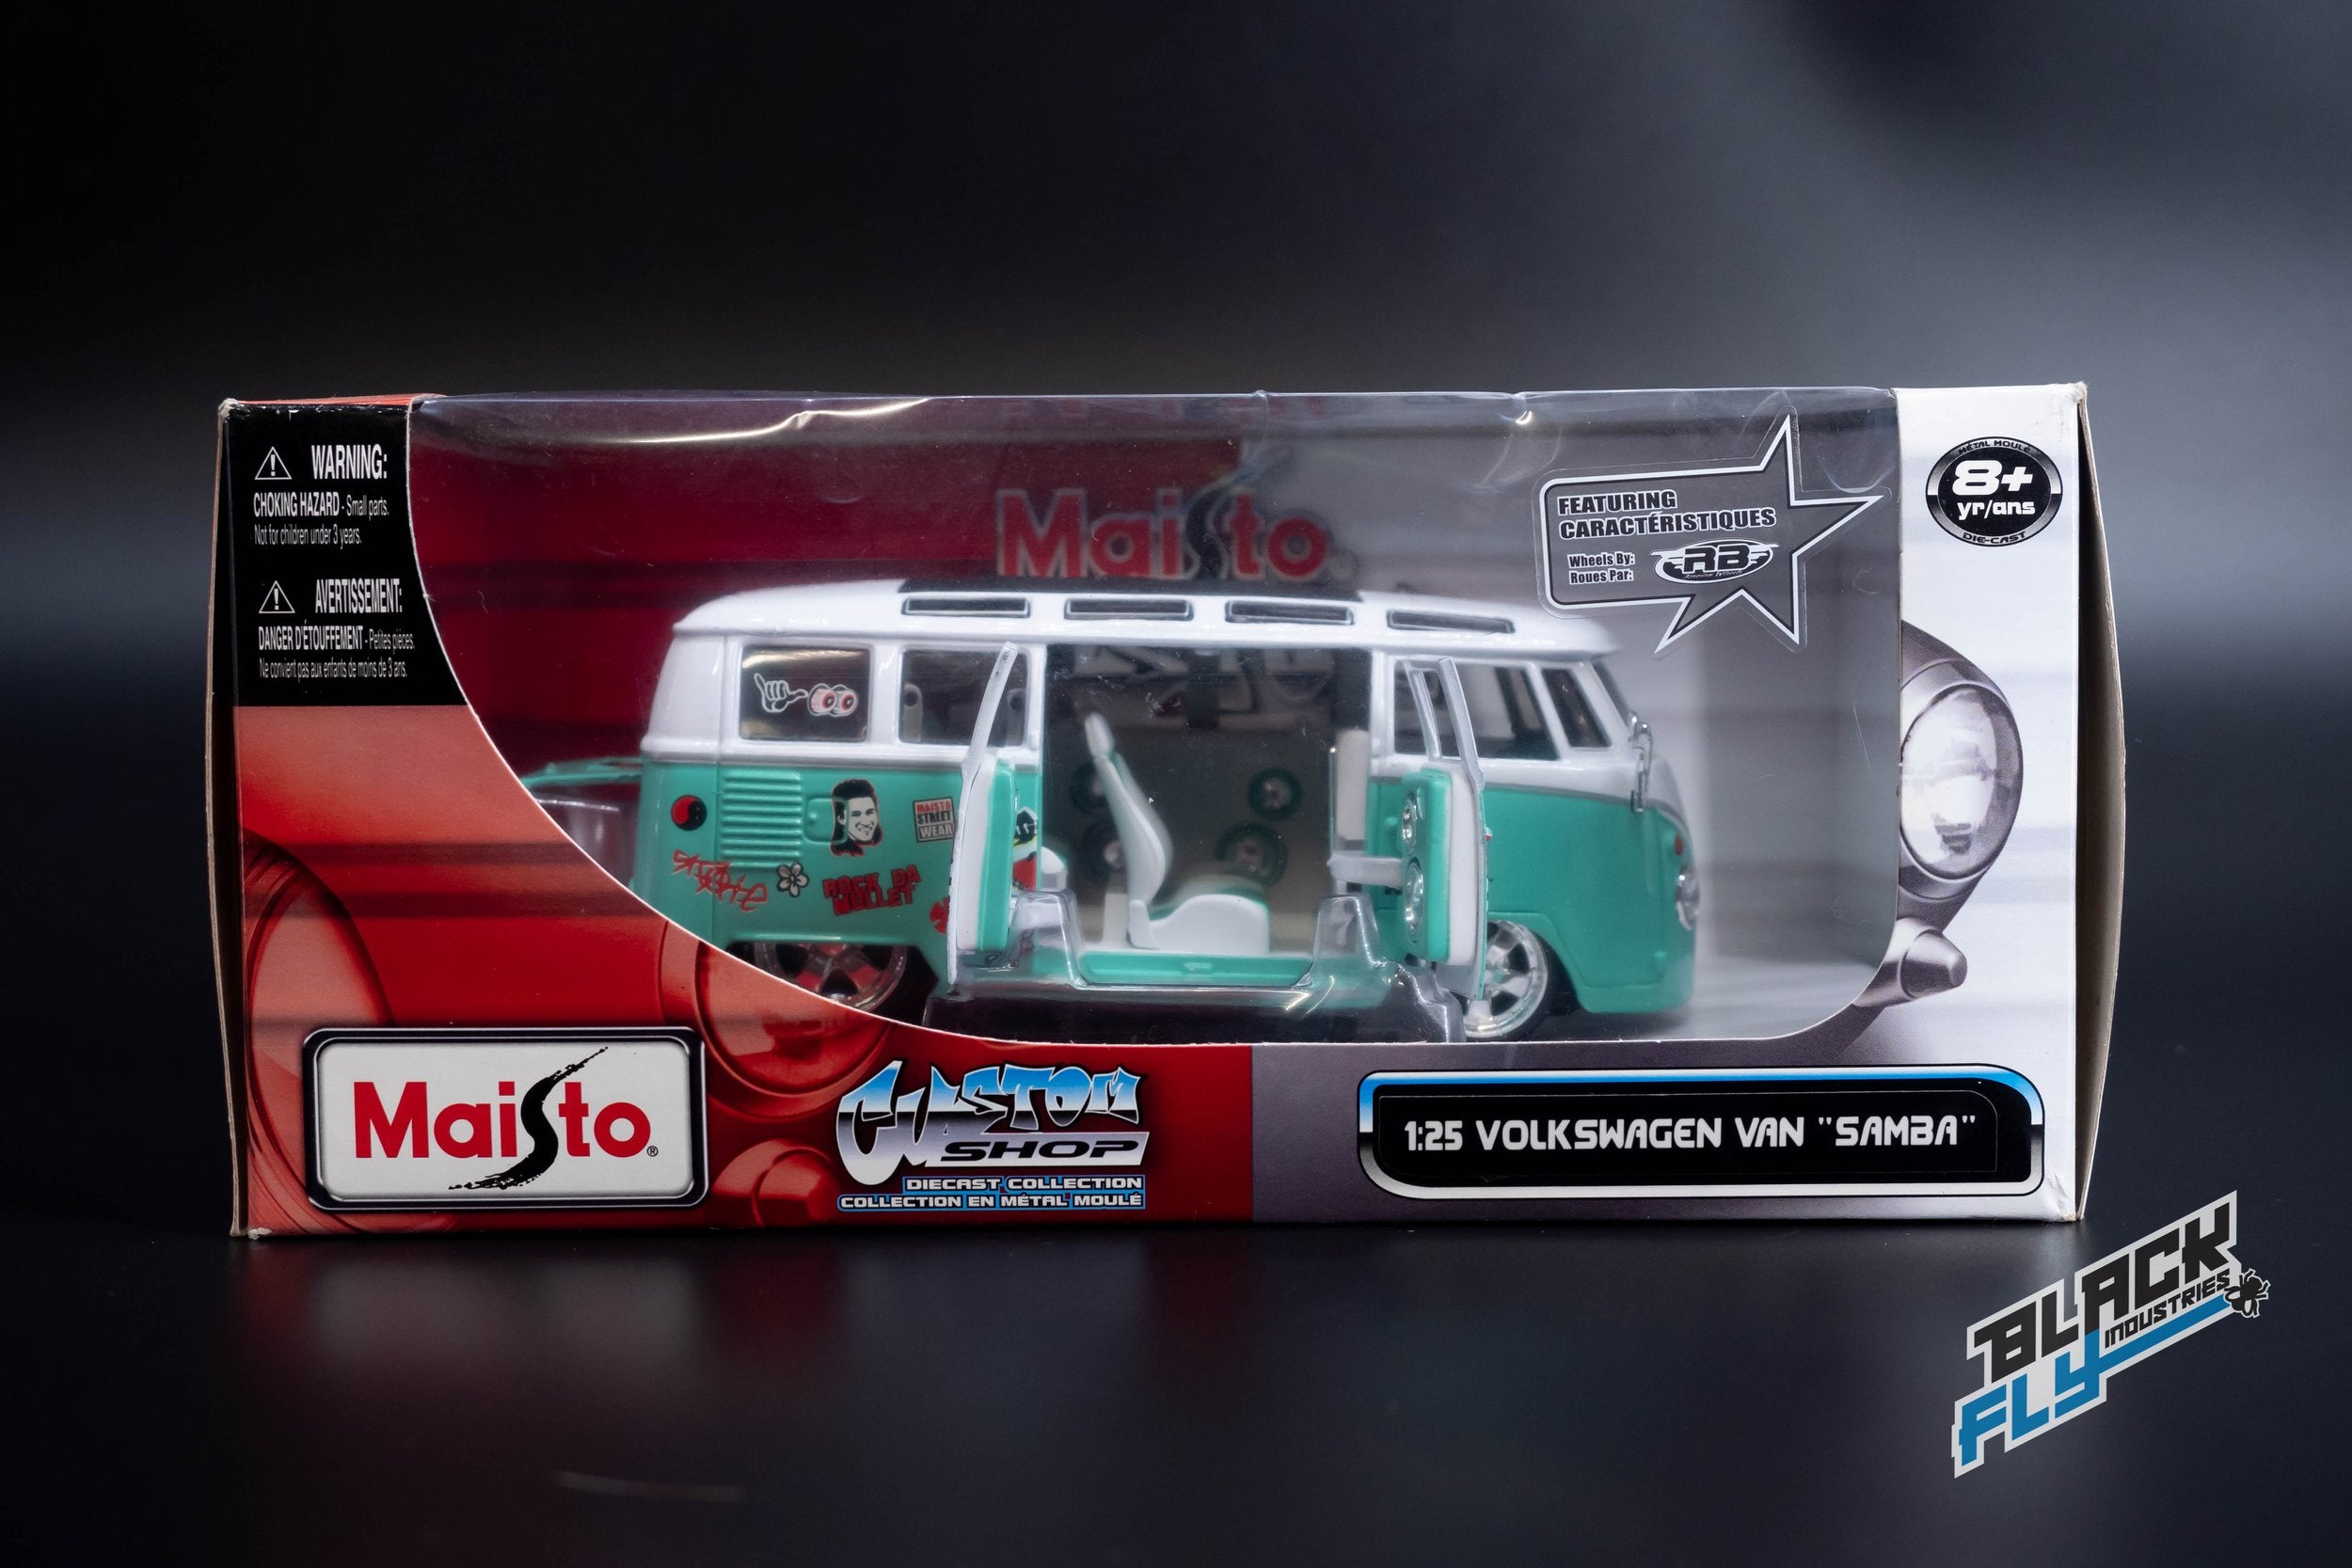 Volkswagen 1/25 Scale Bus "Samba" Green and White w/Graffiti – Black Fly Industries